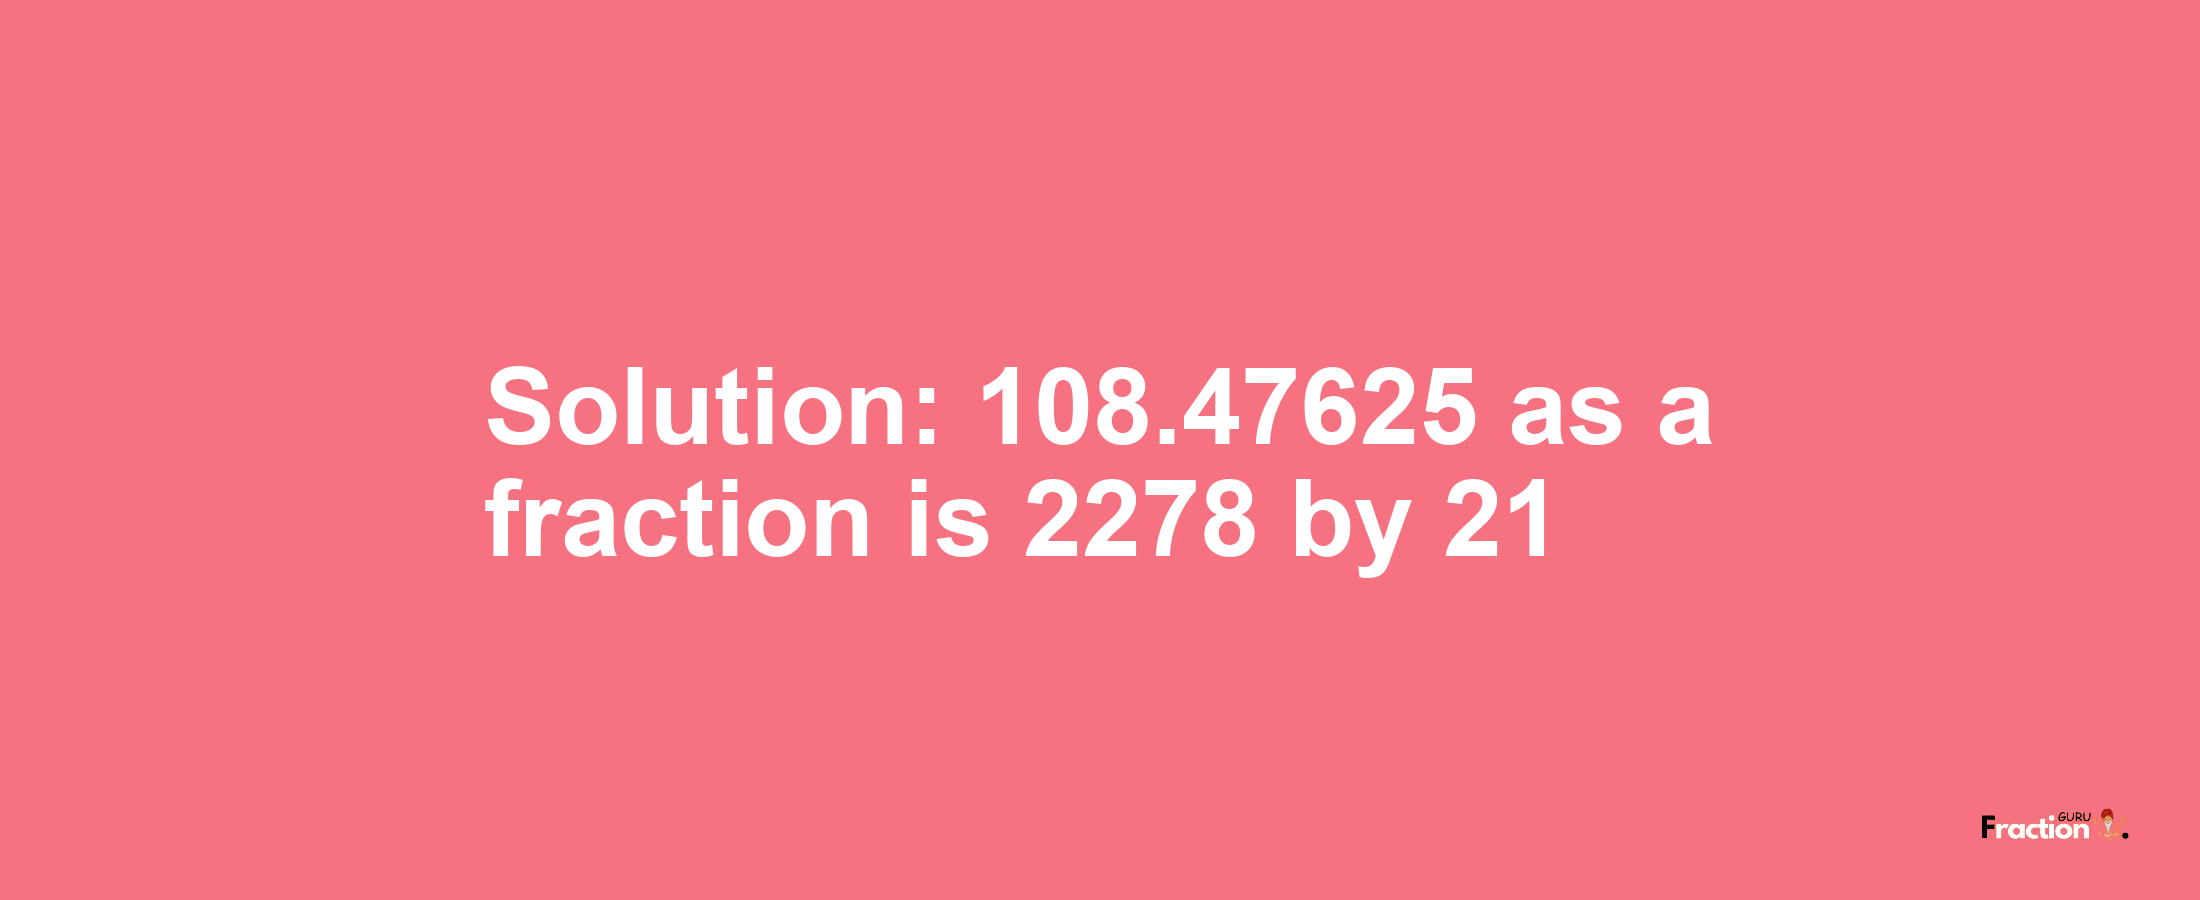 Solution:108.47625 as a fraction is 2278/21